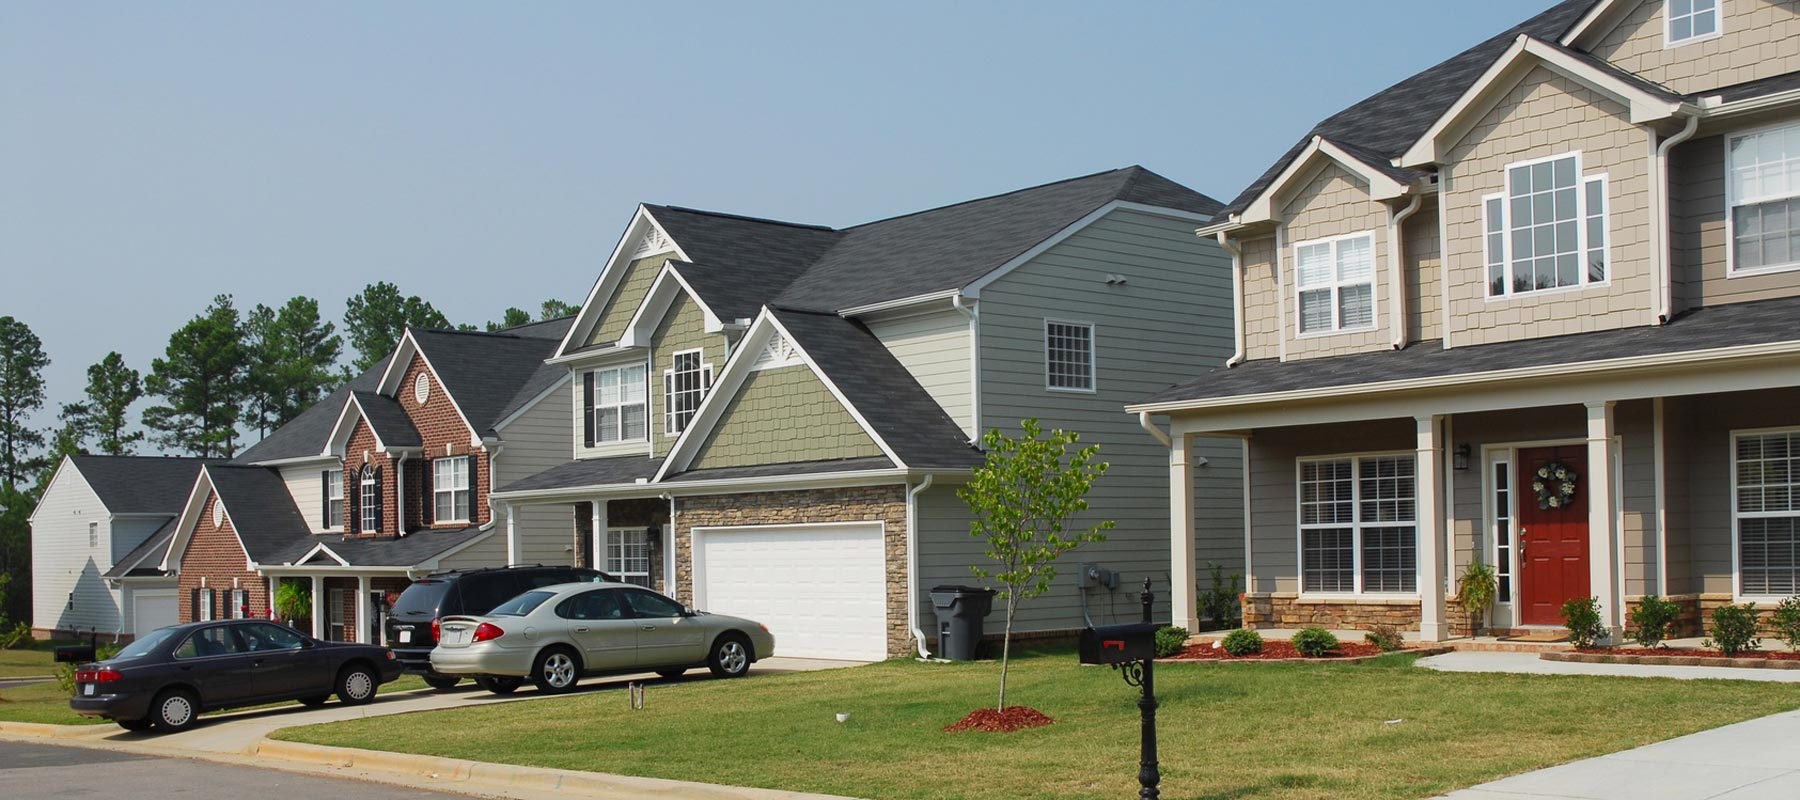 Houses in a Subdivision